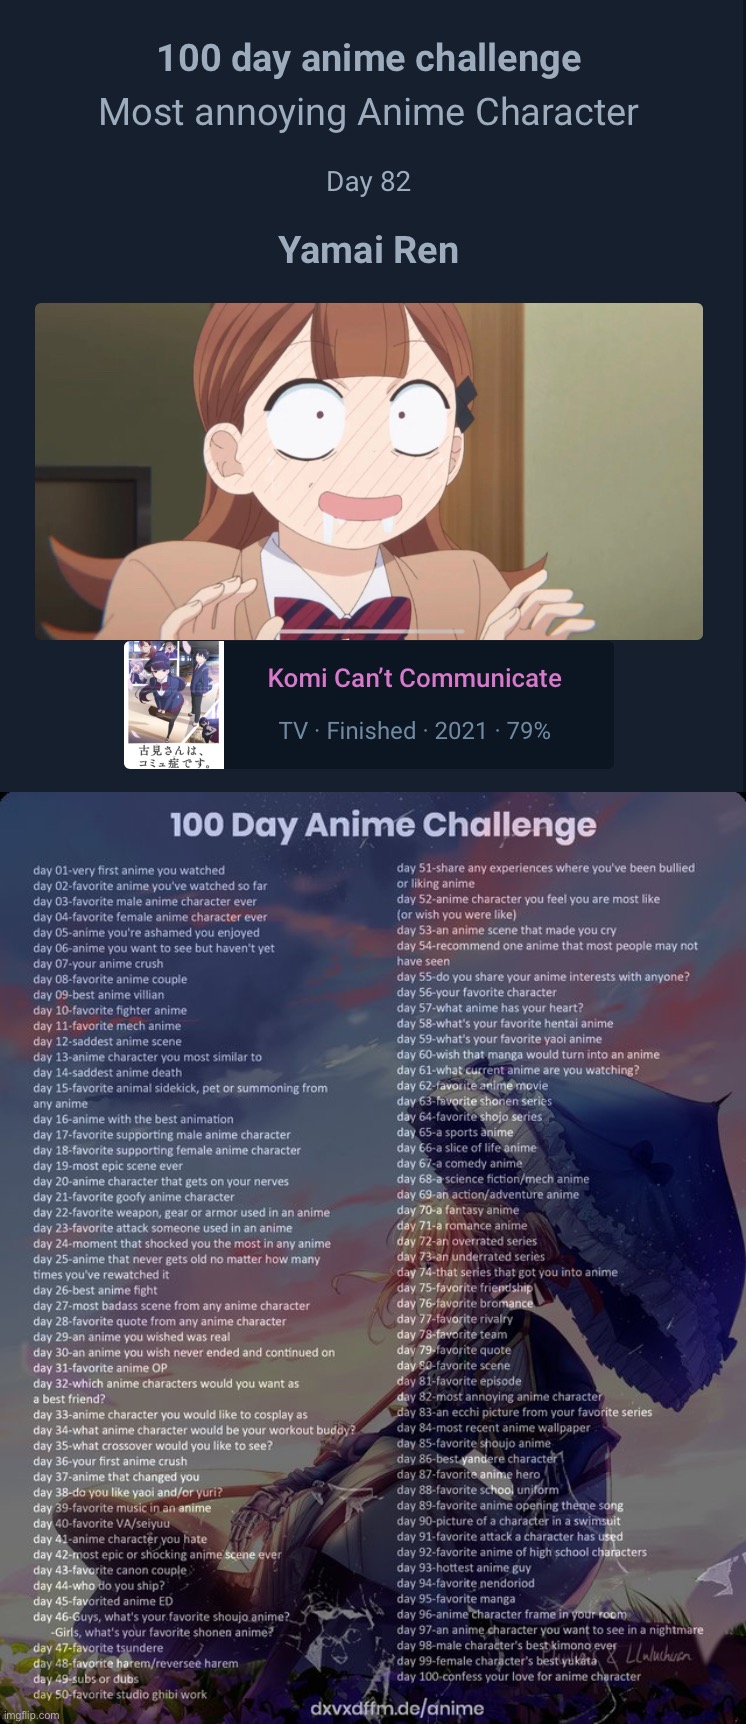 Disgrace to humanity | image tagged in 100 day anime challenge | made w/ Imgflip meme maker